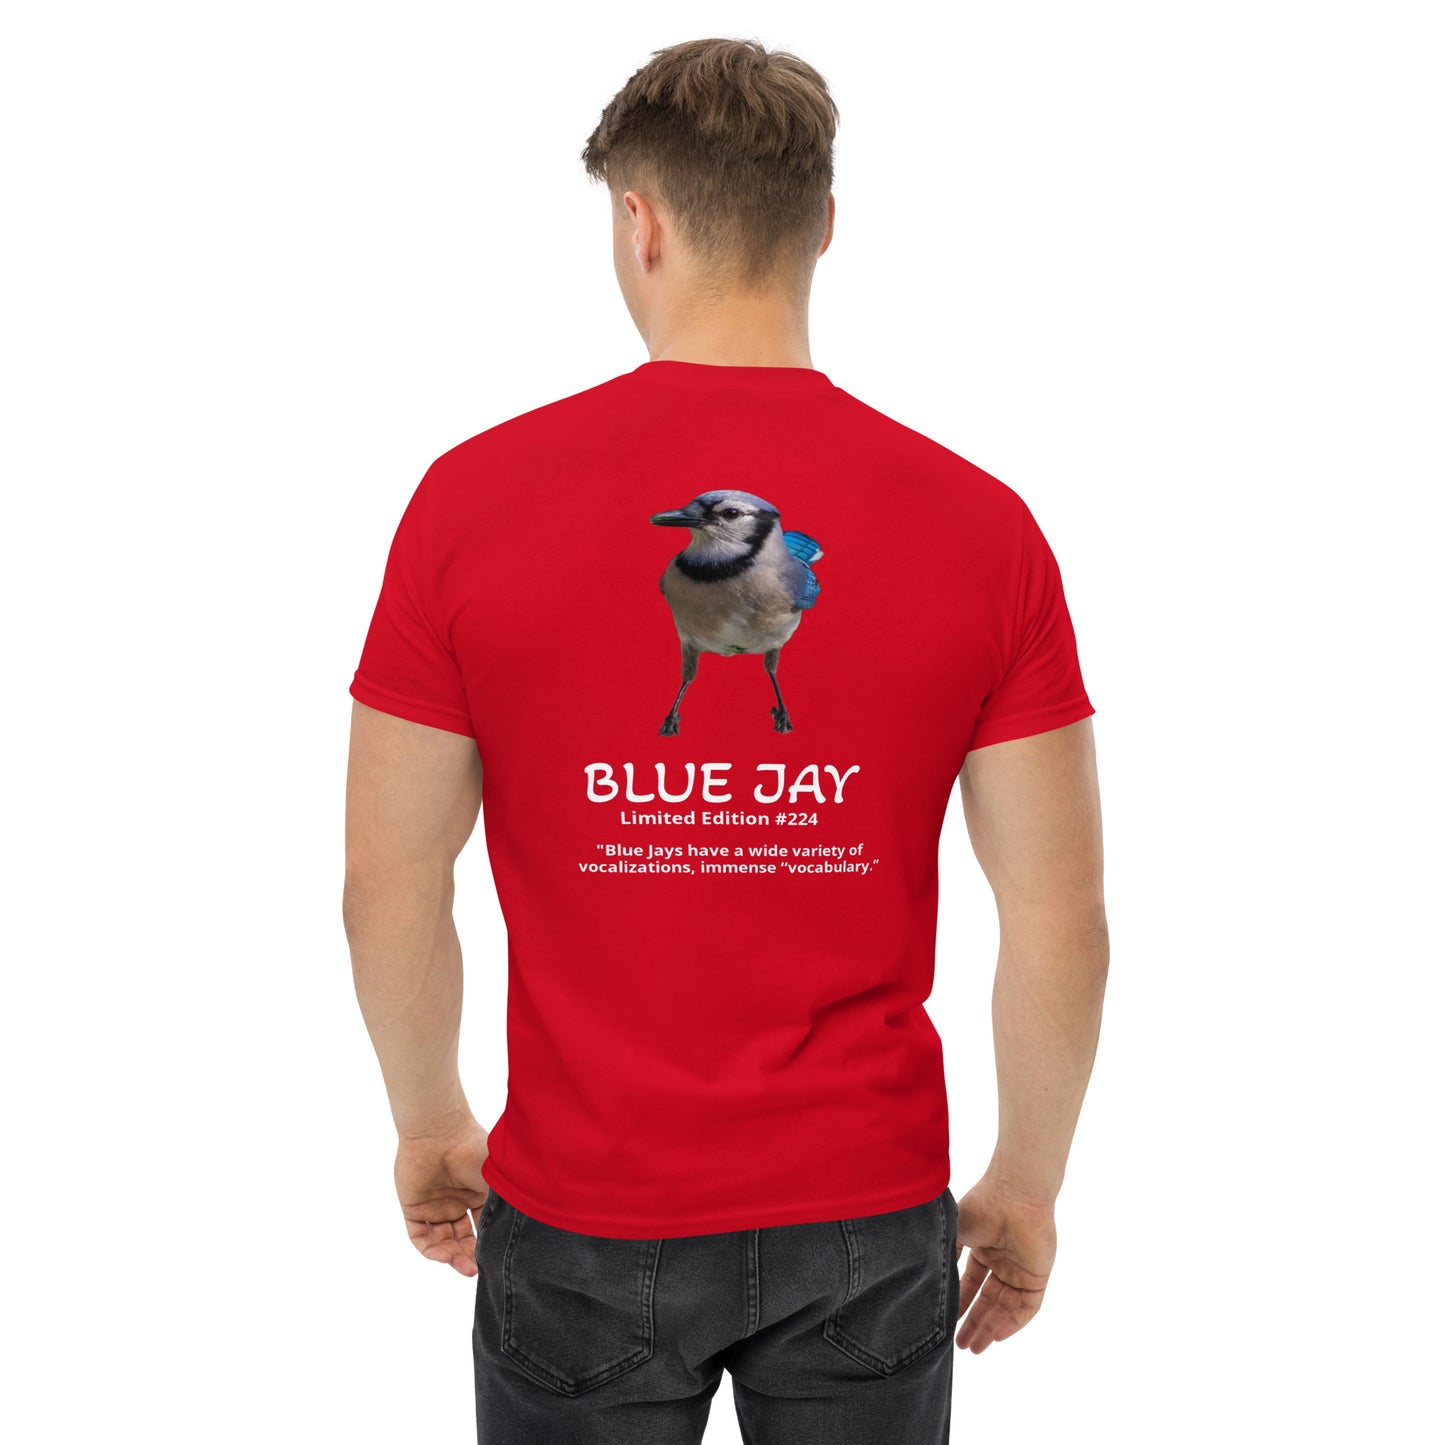 Blue Jay - Limited Edition